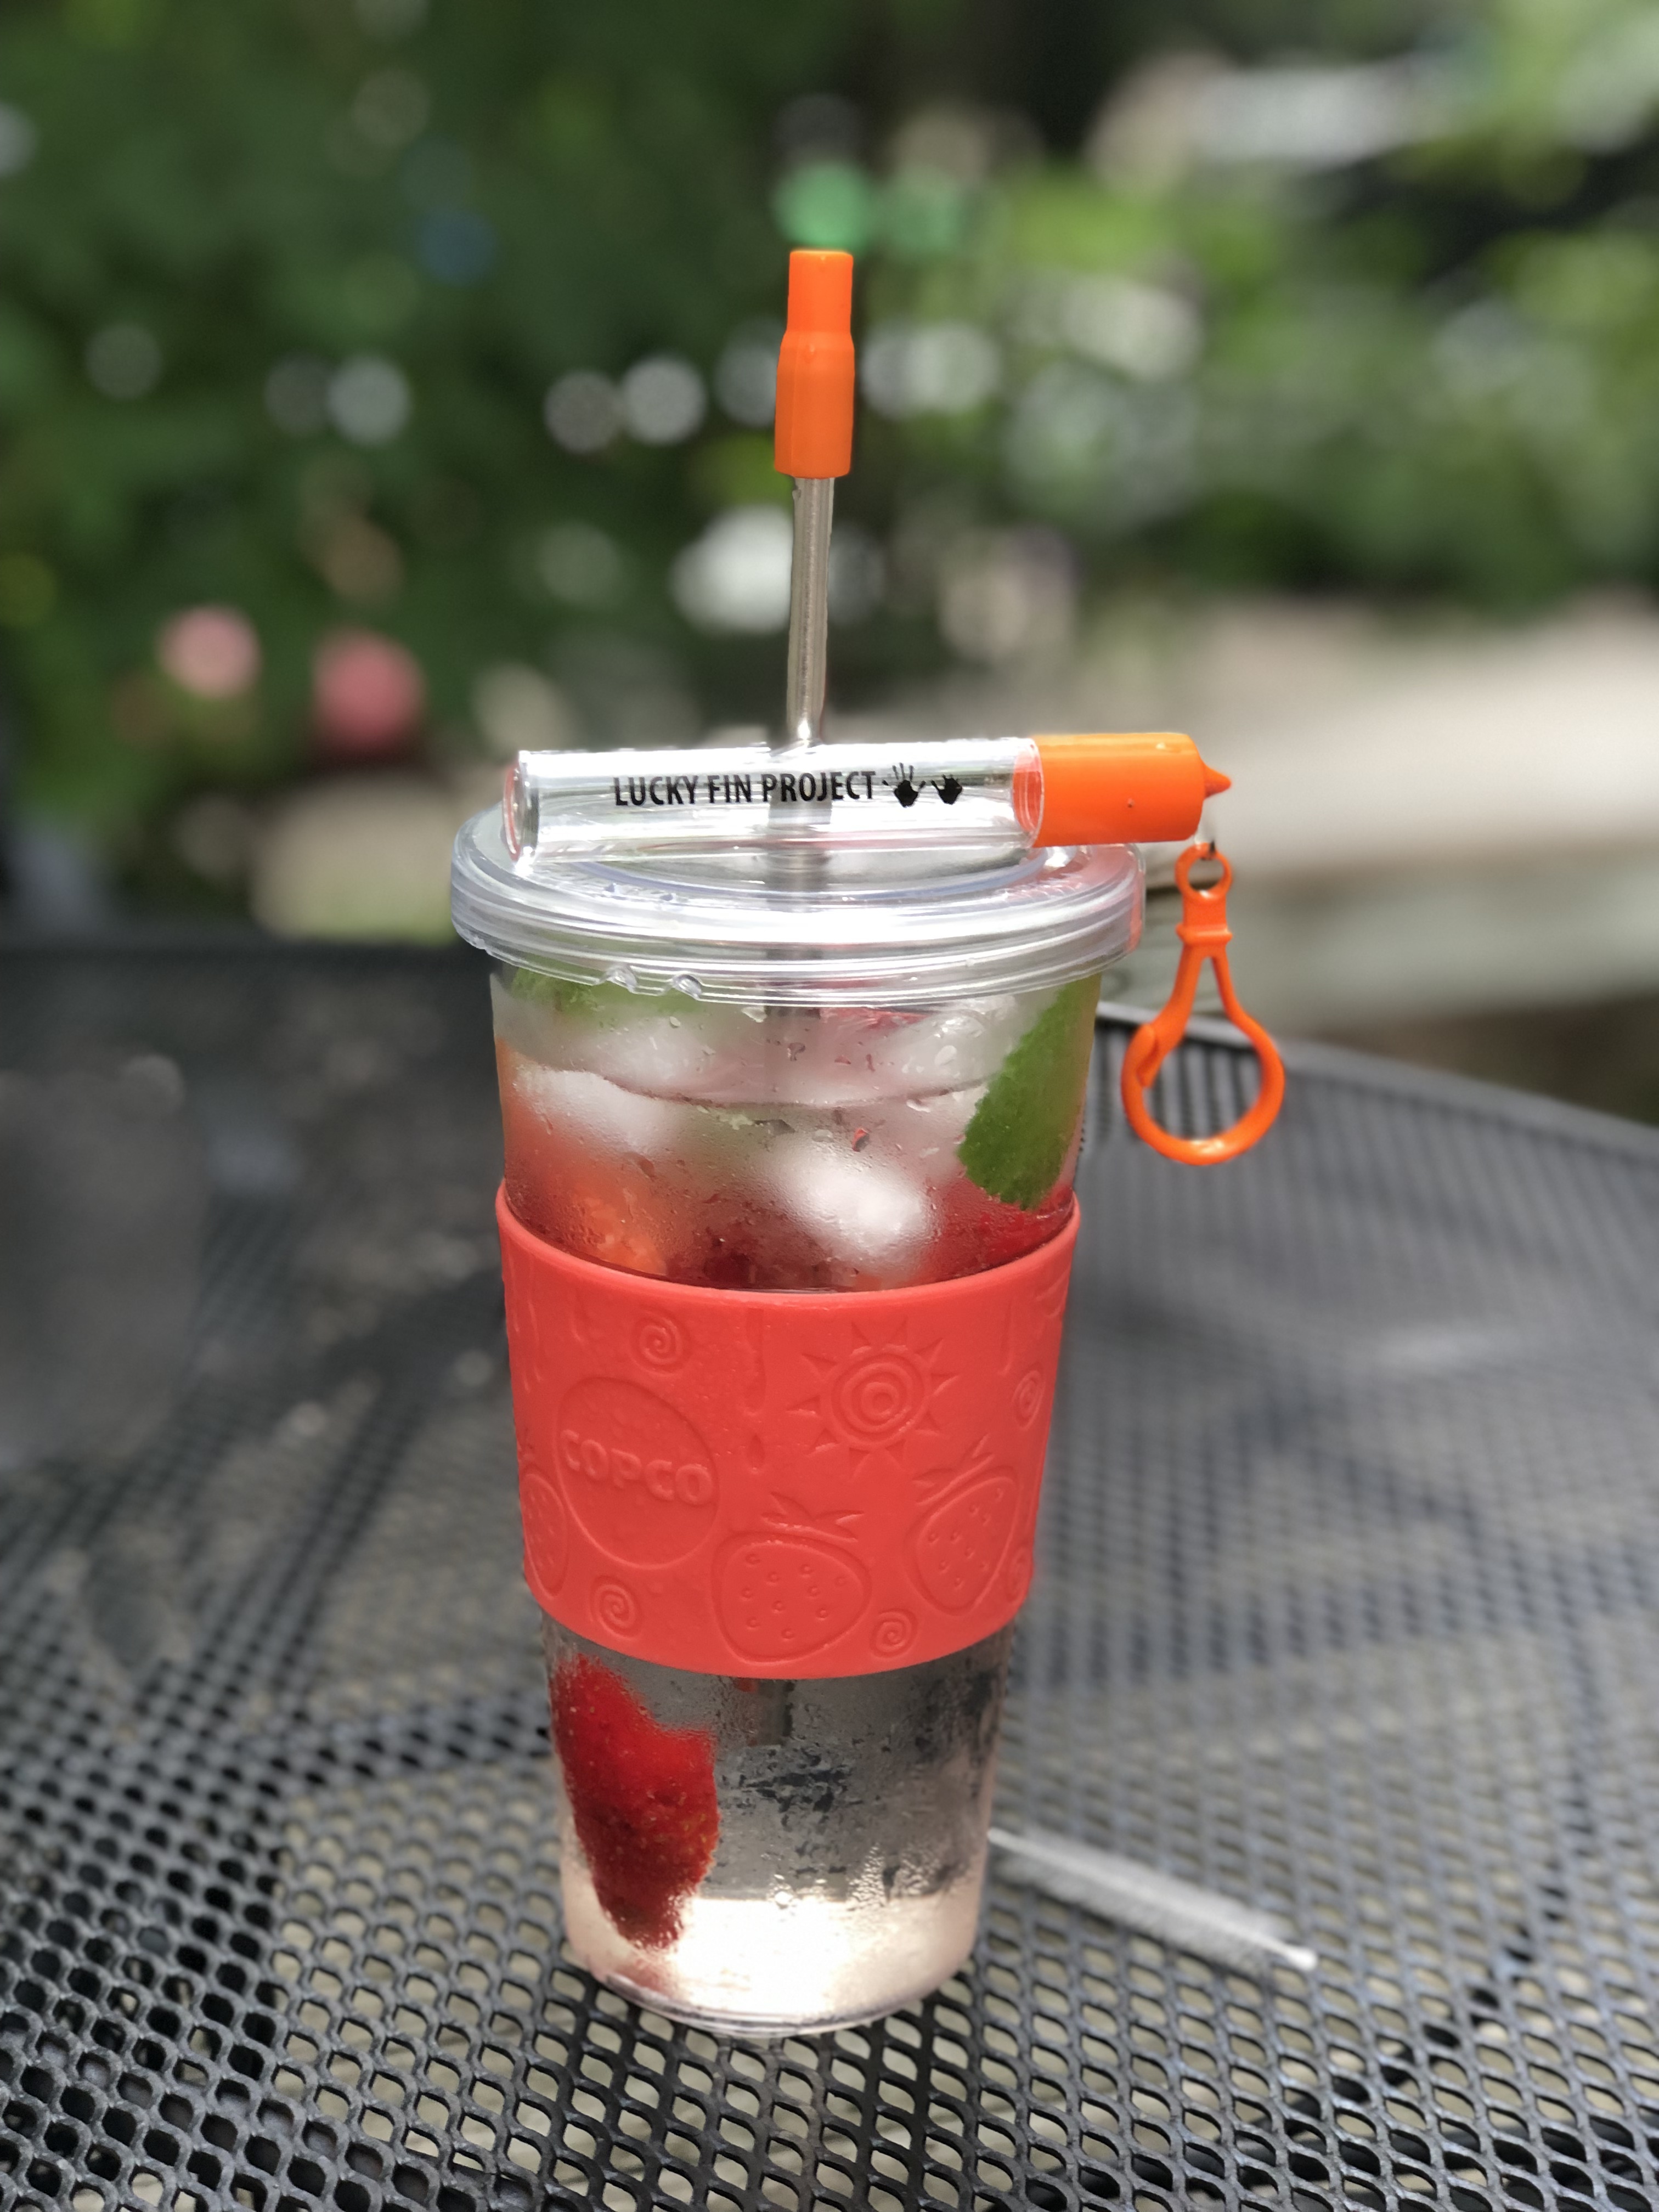 Collapsible Stainless Steel Straw Kit